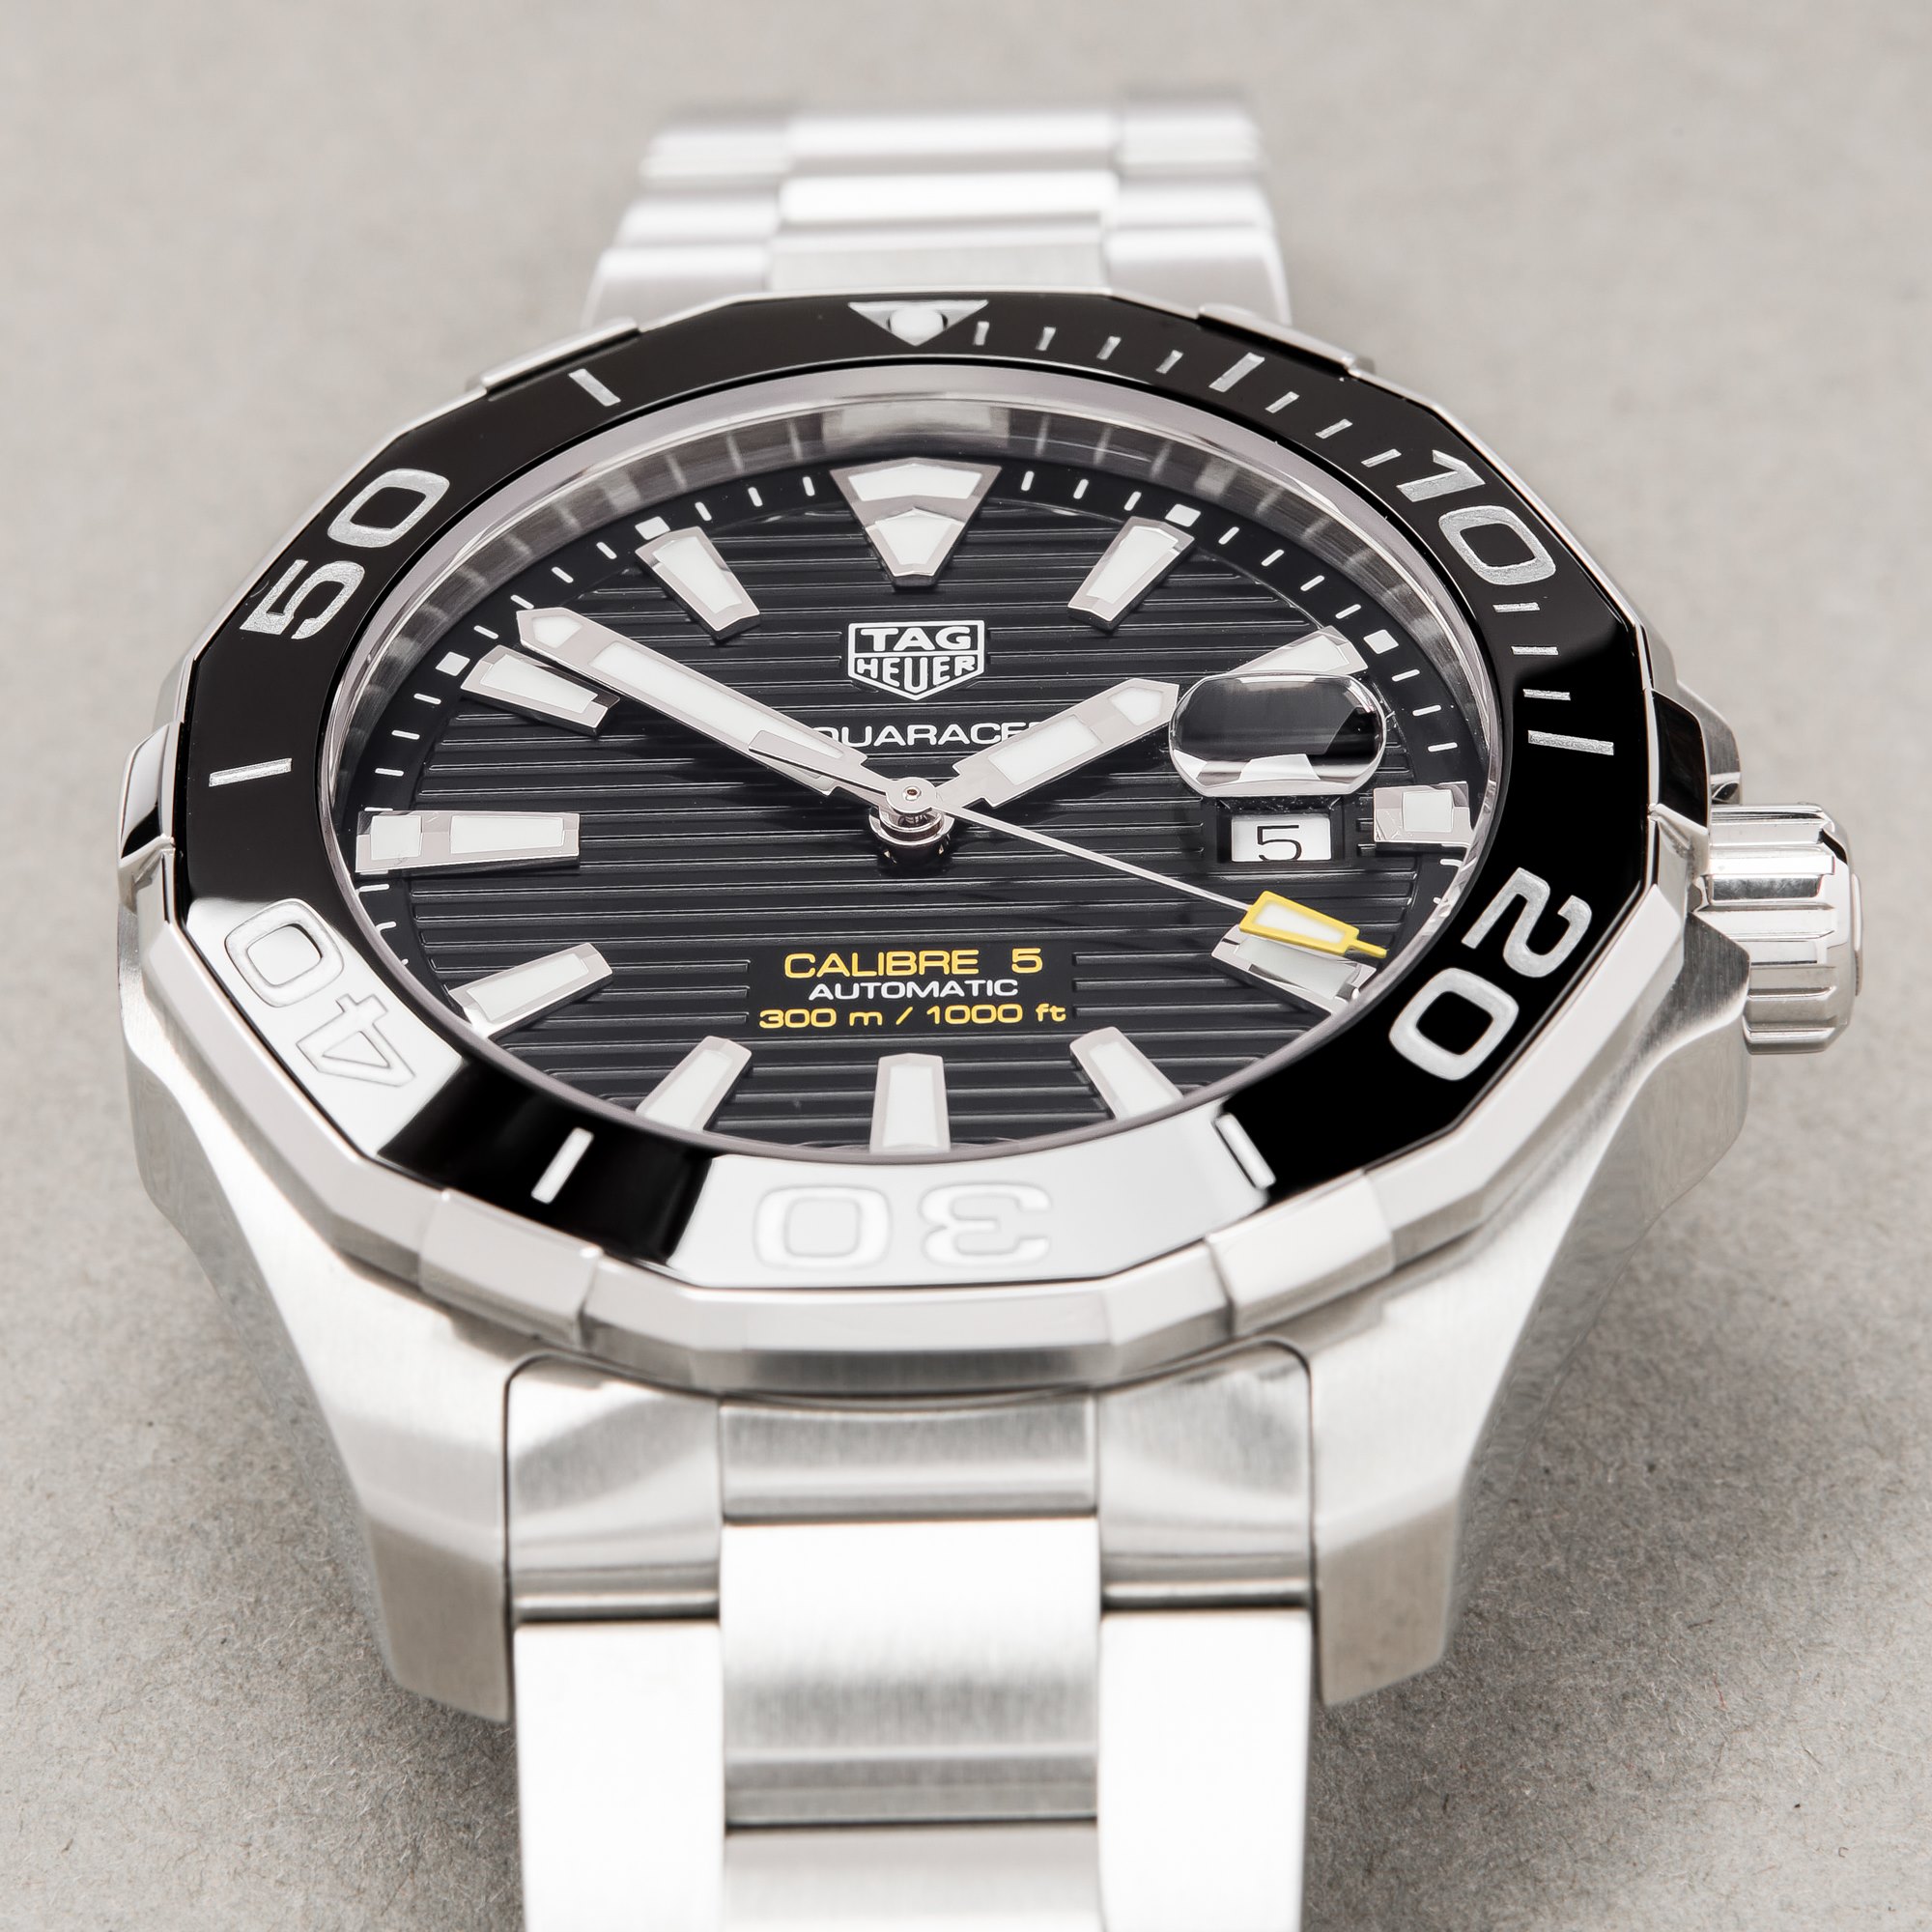 Tag Heuer Aquaracer Stainless Steel WAY201A.BA0927